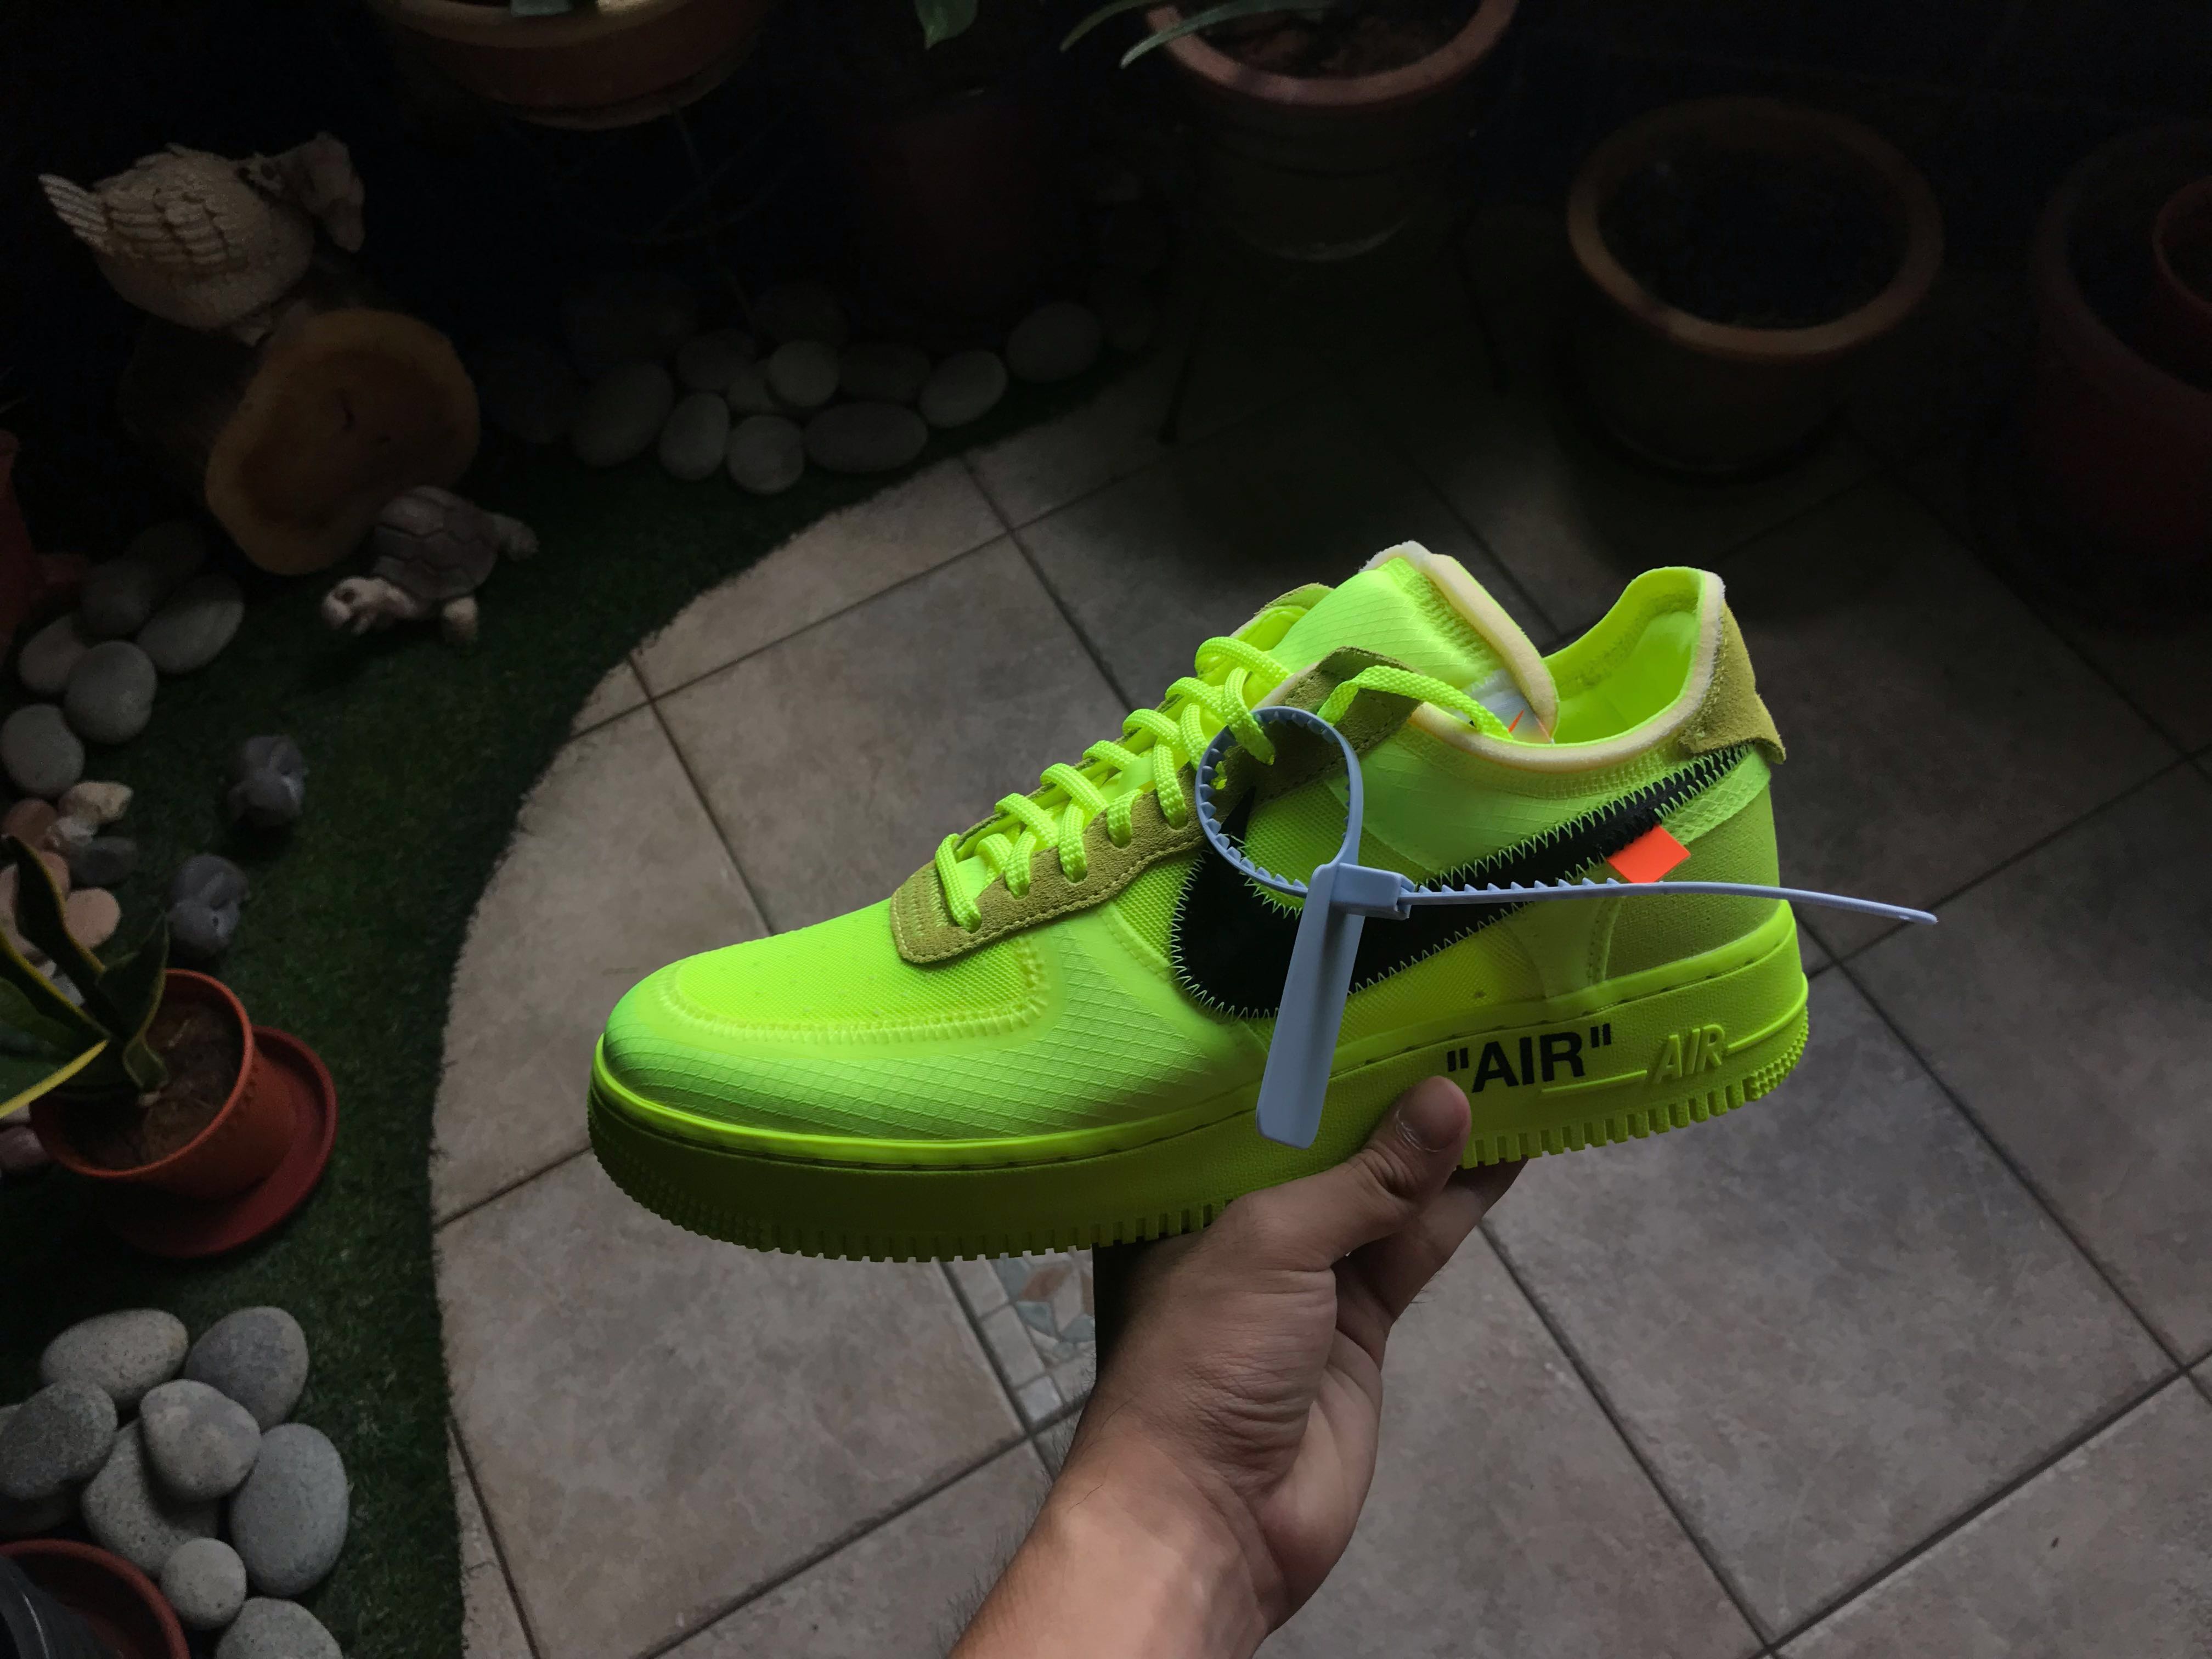 the 10 air force 1 low off white